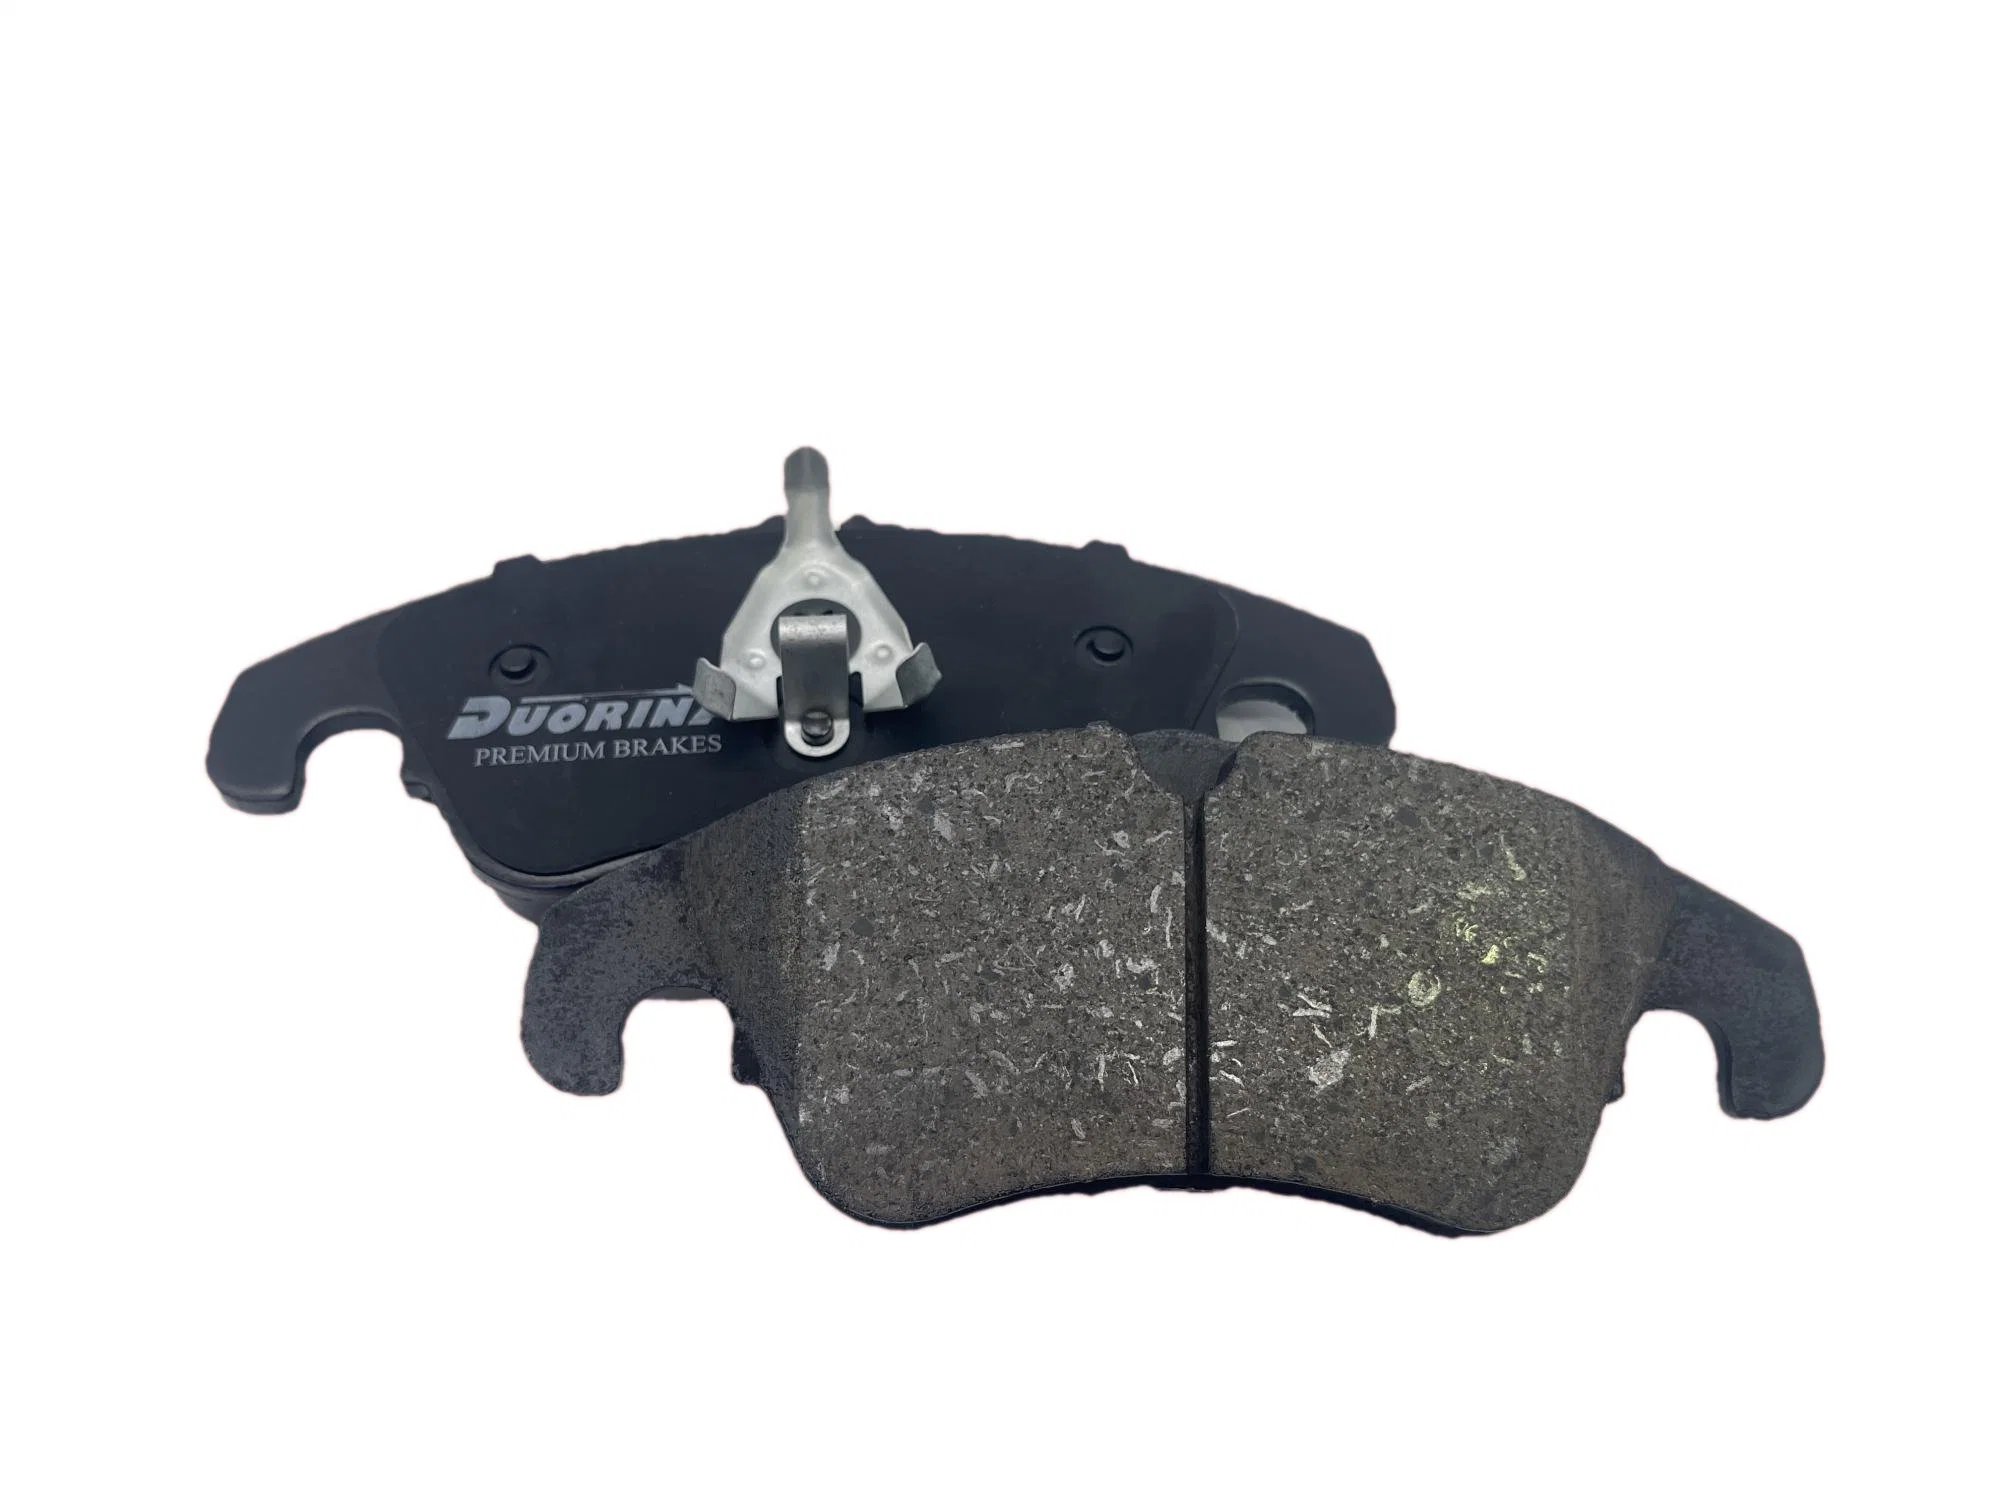 D1322 High quality/High cost performance  Factory Ceramic Carbon Fiber Disc Brake Pads for Audi A4 A5 A6 A7 Q5 S4 S5